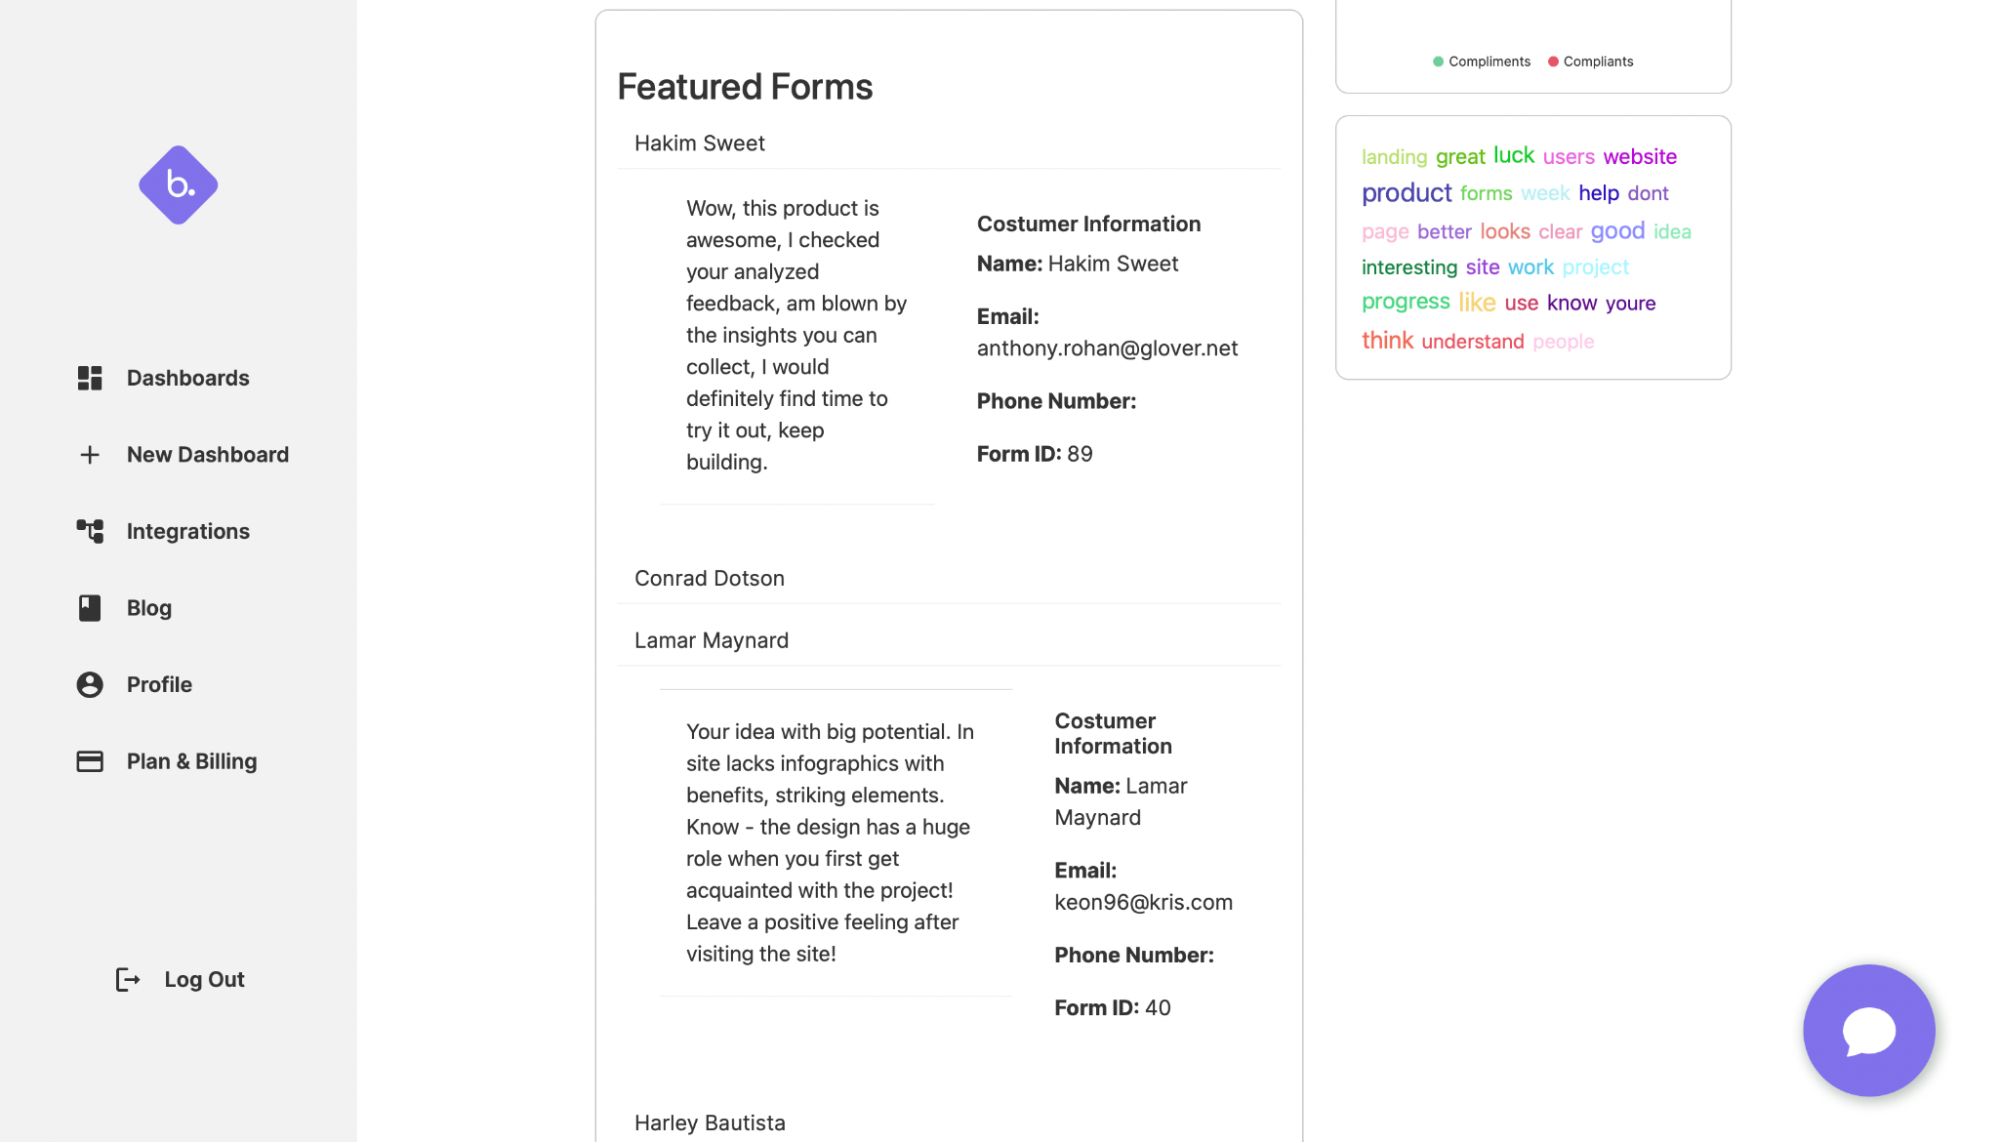 Featured forms